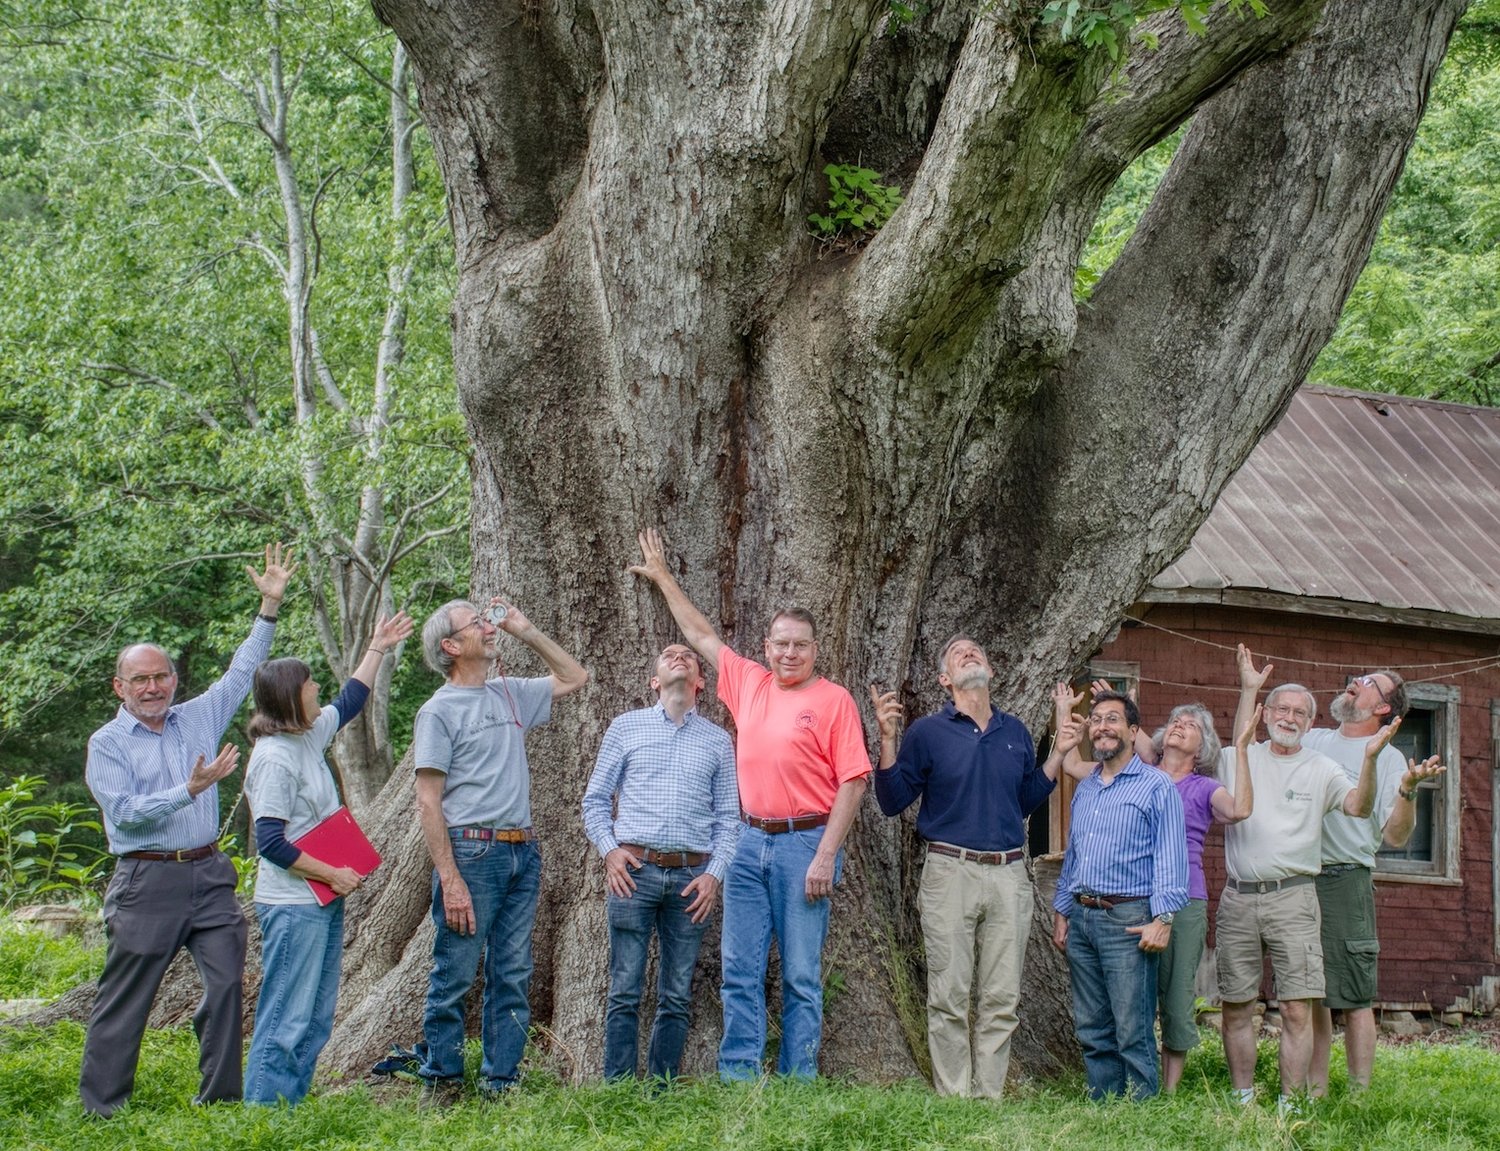 Members of Grand Trees of Chatham’s board of directors pose around the N.C. Champion White Oak in North Carolina for 2015. Posing, from left, are JC Garbutt, Sharon Garbutt, Andy Upshaw, Matt Jones, Dean Westman, Rouse Wilson, Paul Horne, Connie McAdams, Gary Simpson and Phil Cox..